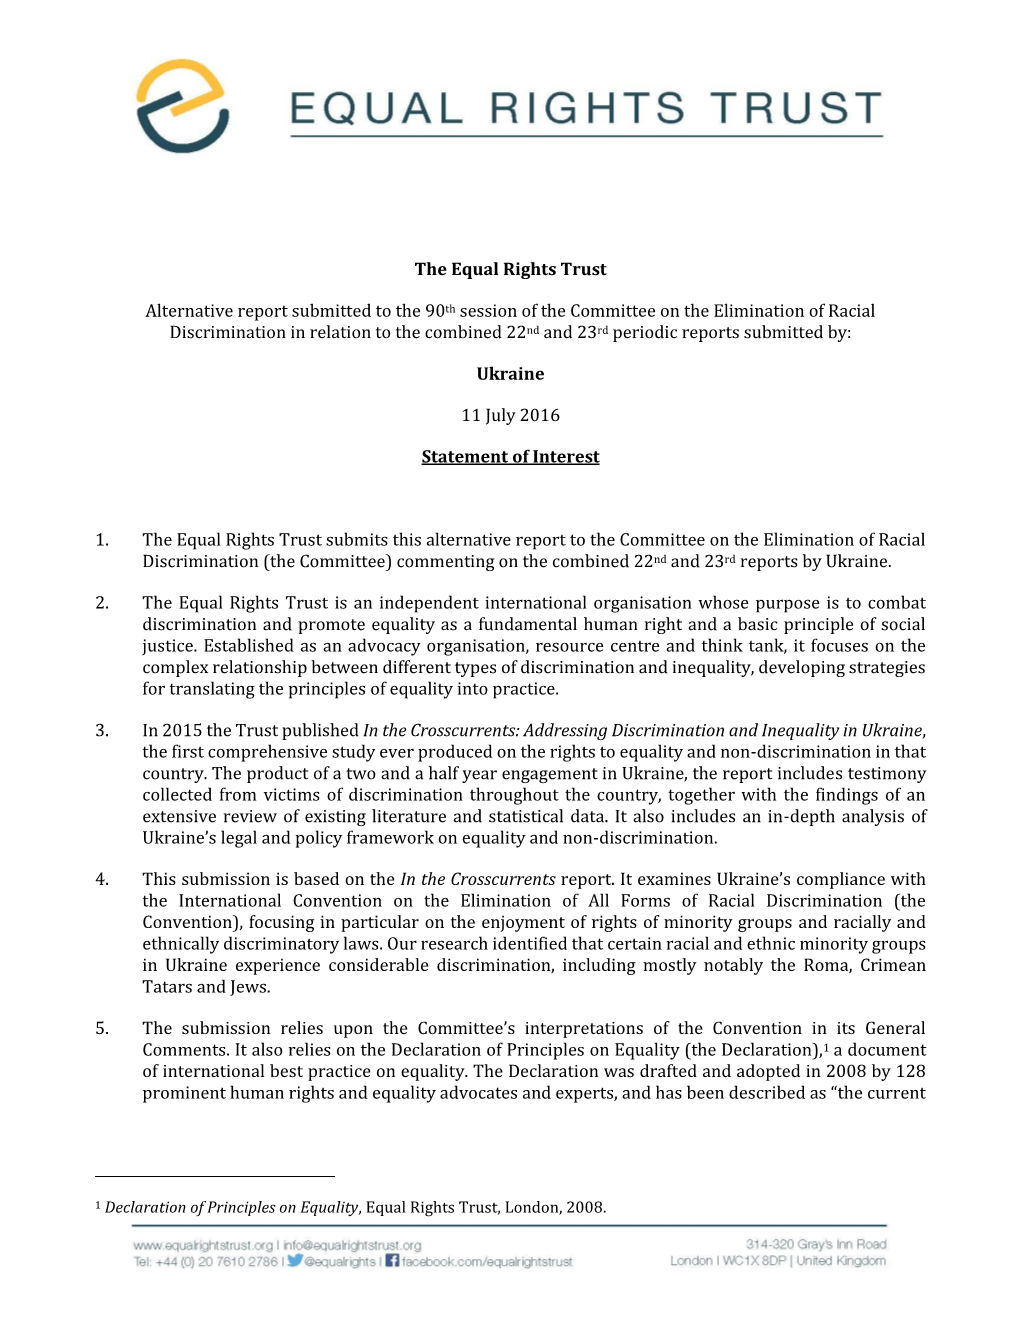 The Equal Rights Trust Alternative Report Submitted to the 90Th Session